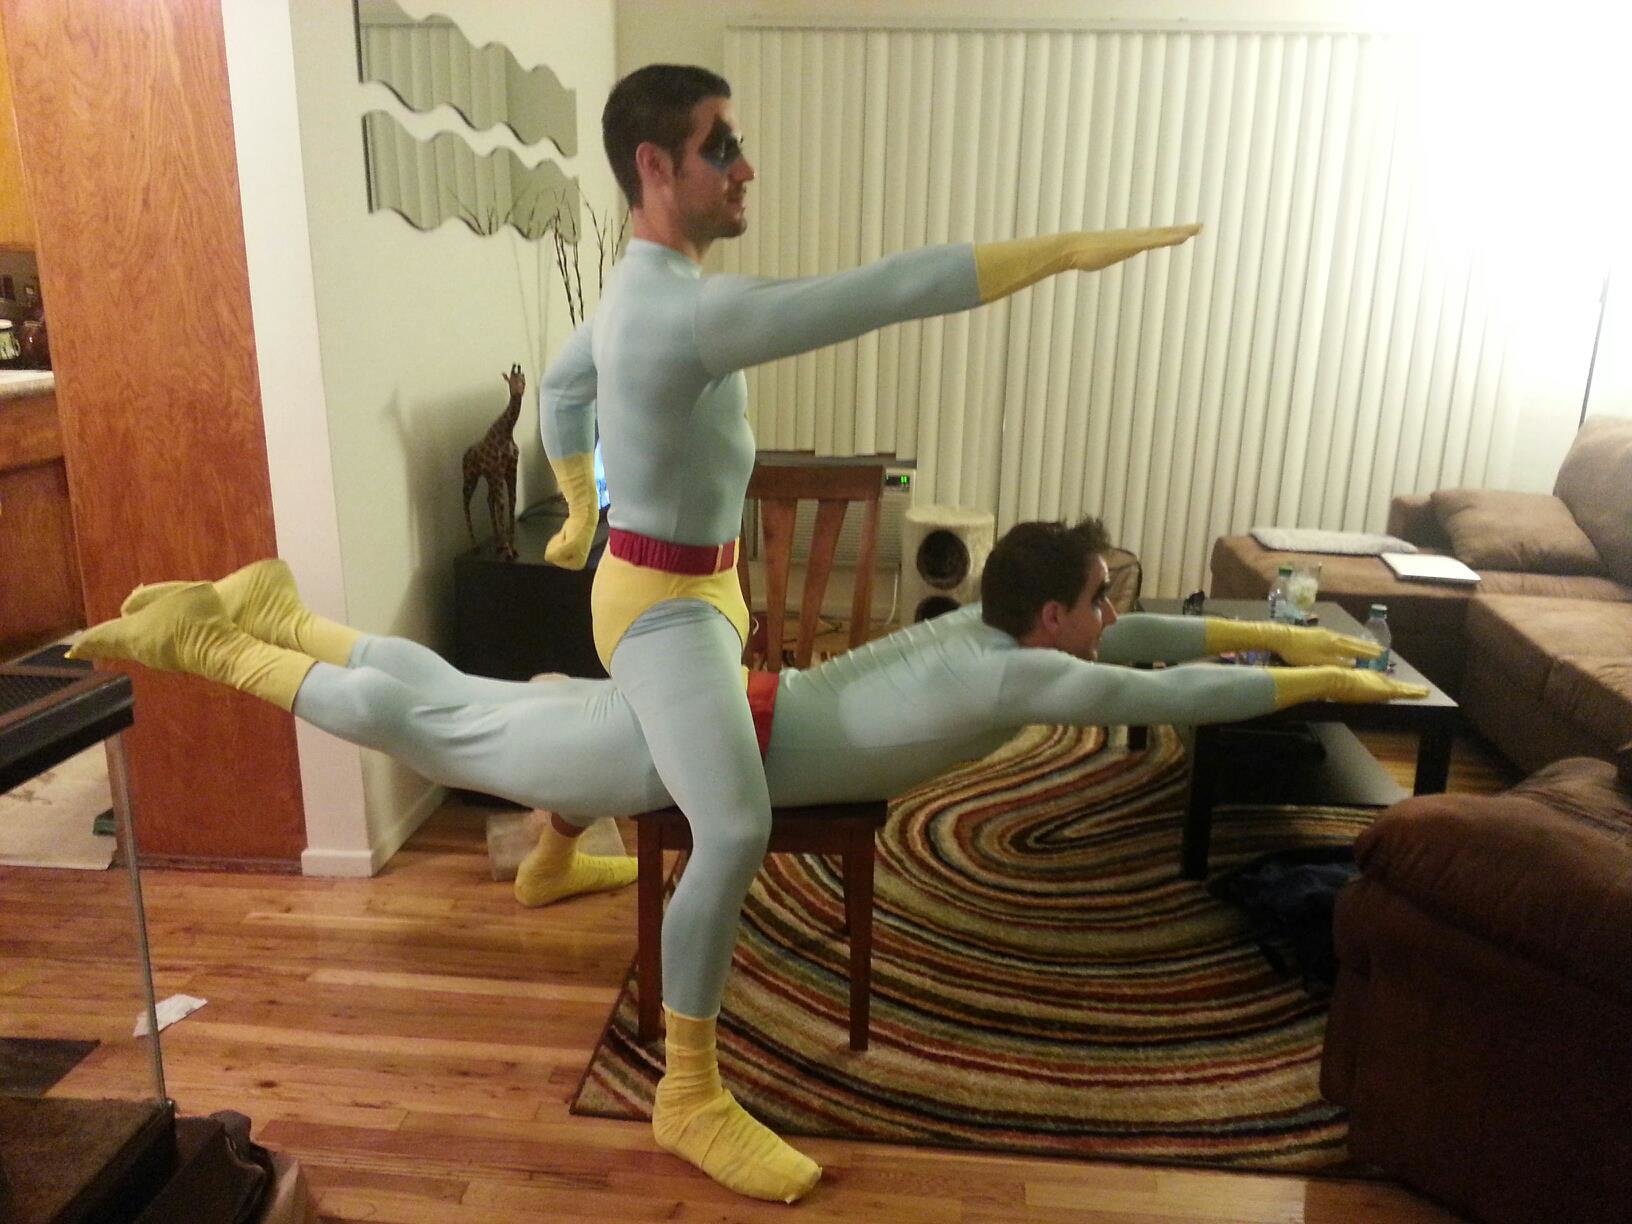 saturday night live ambiguously gay duo costume